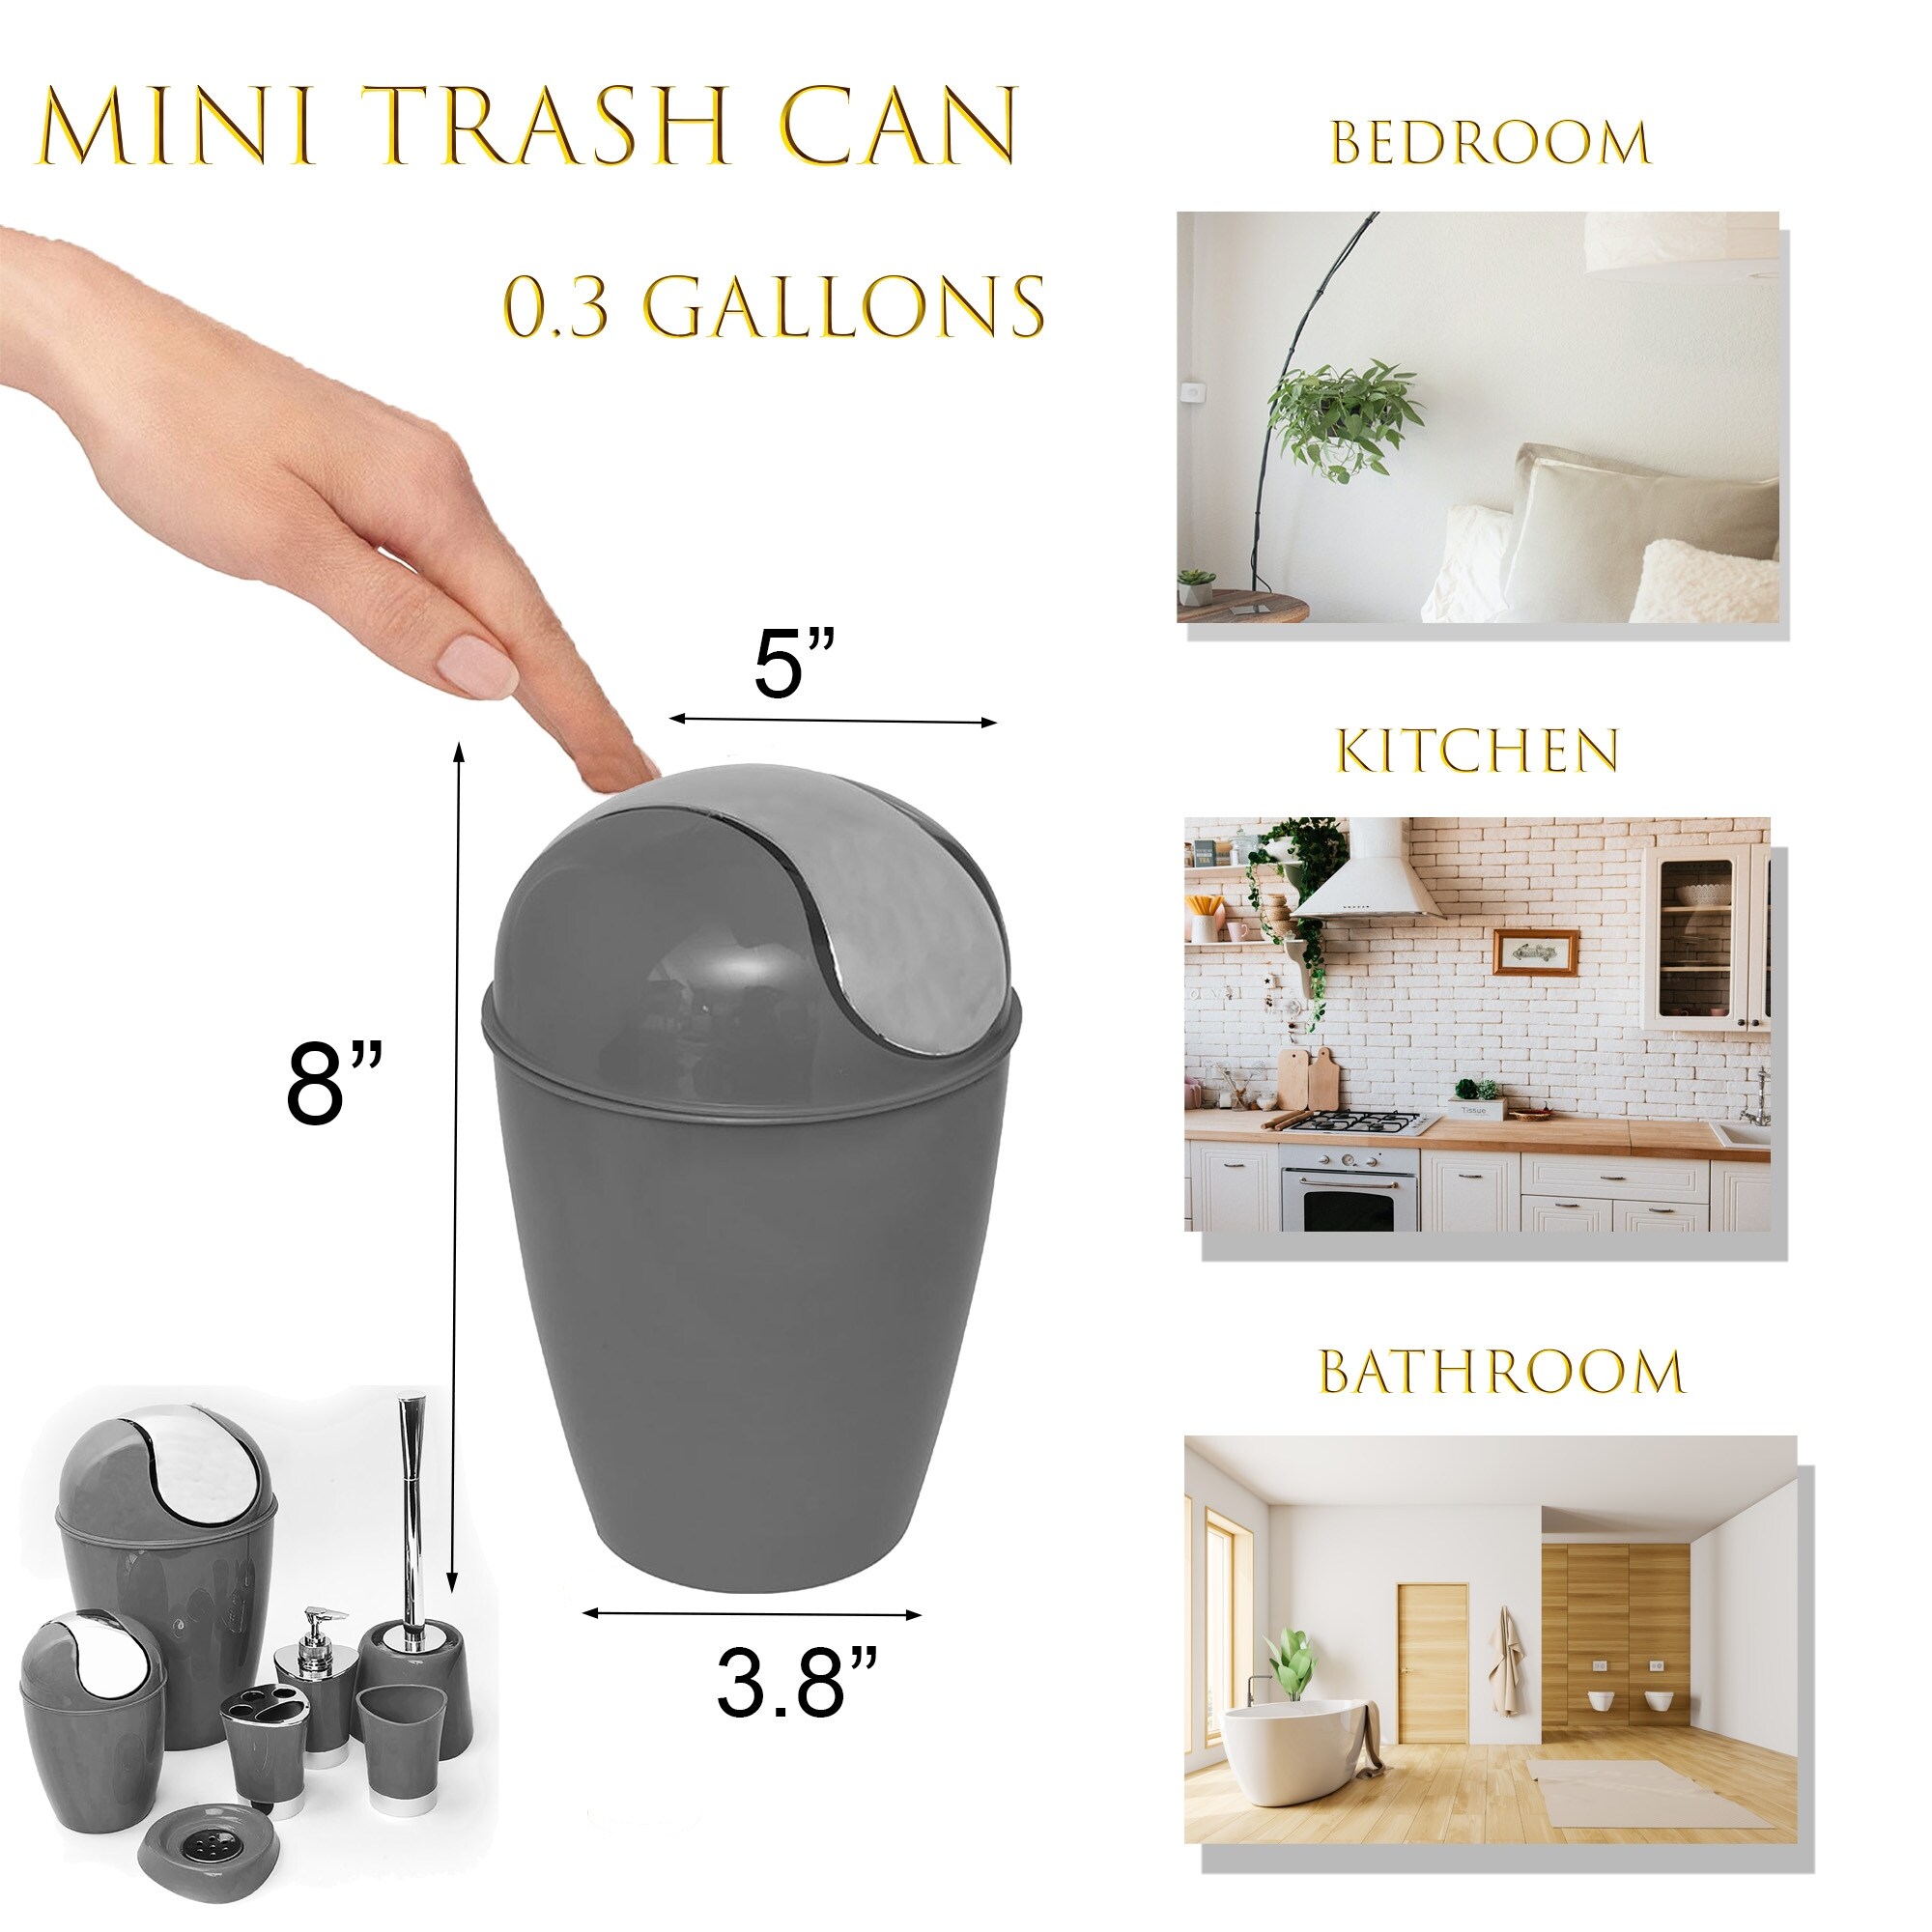 https://ak1.ostkcdn.com/images/products/is/images/direct/c70d6890d9a6184cf7ec69dcdc3536b3e9df880f/Mini-Trash-Can-for-Countertop-0.5-Liter--0.3-Gal-Chrome-Lid.jpg